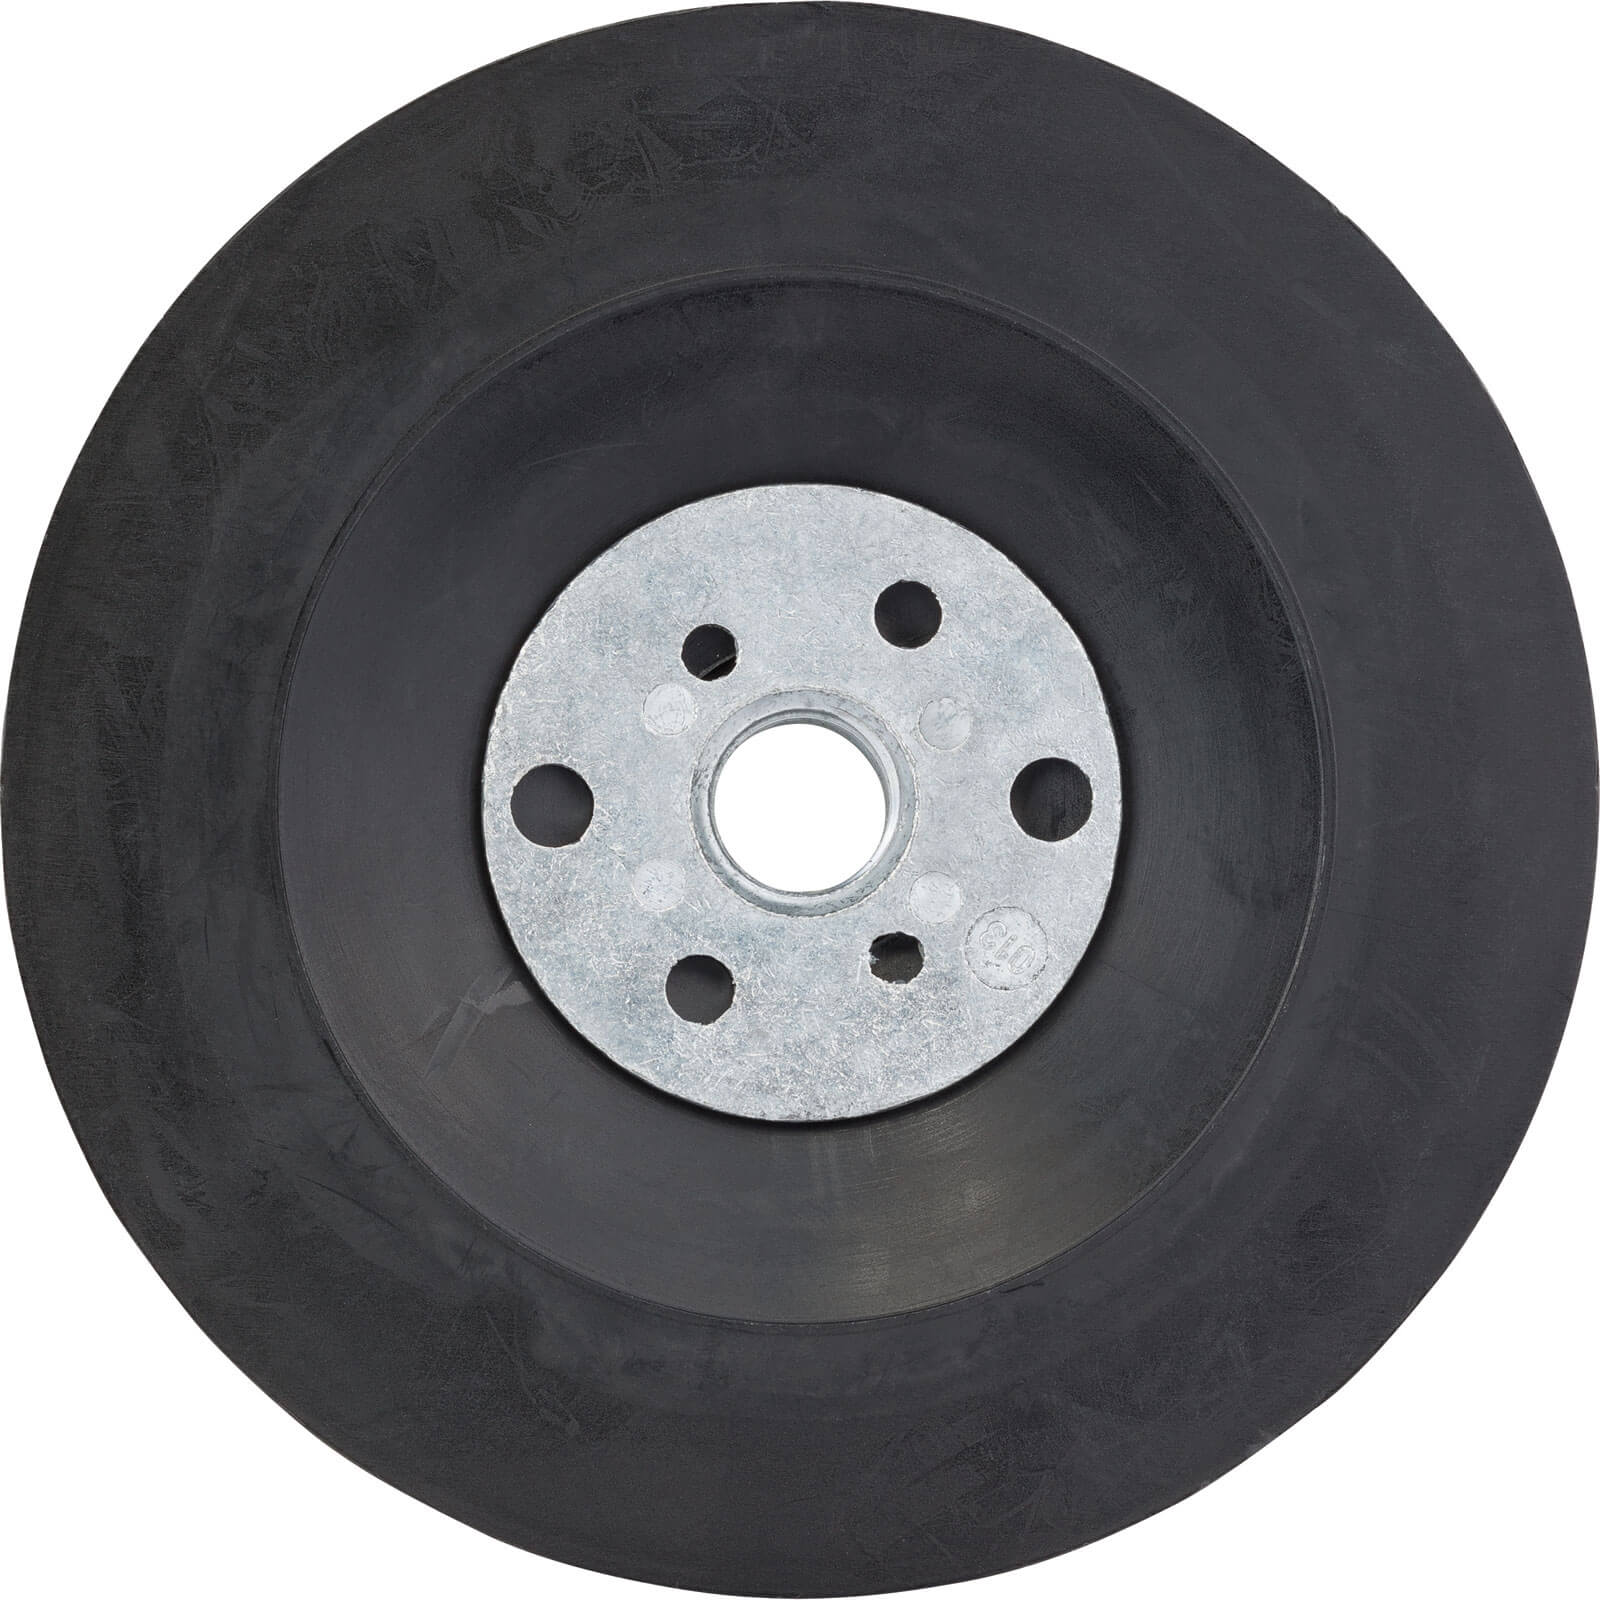 Image of Bosch M14 Angle Grinder Backing Pad 115mm